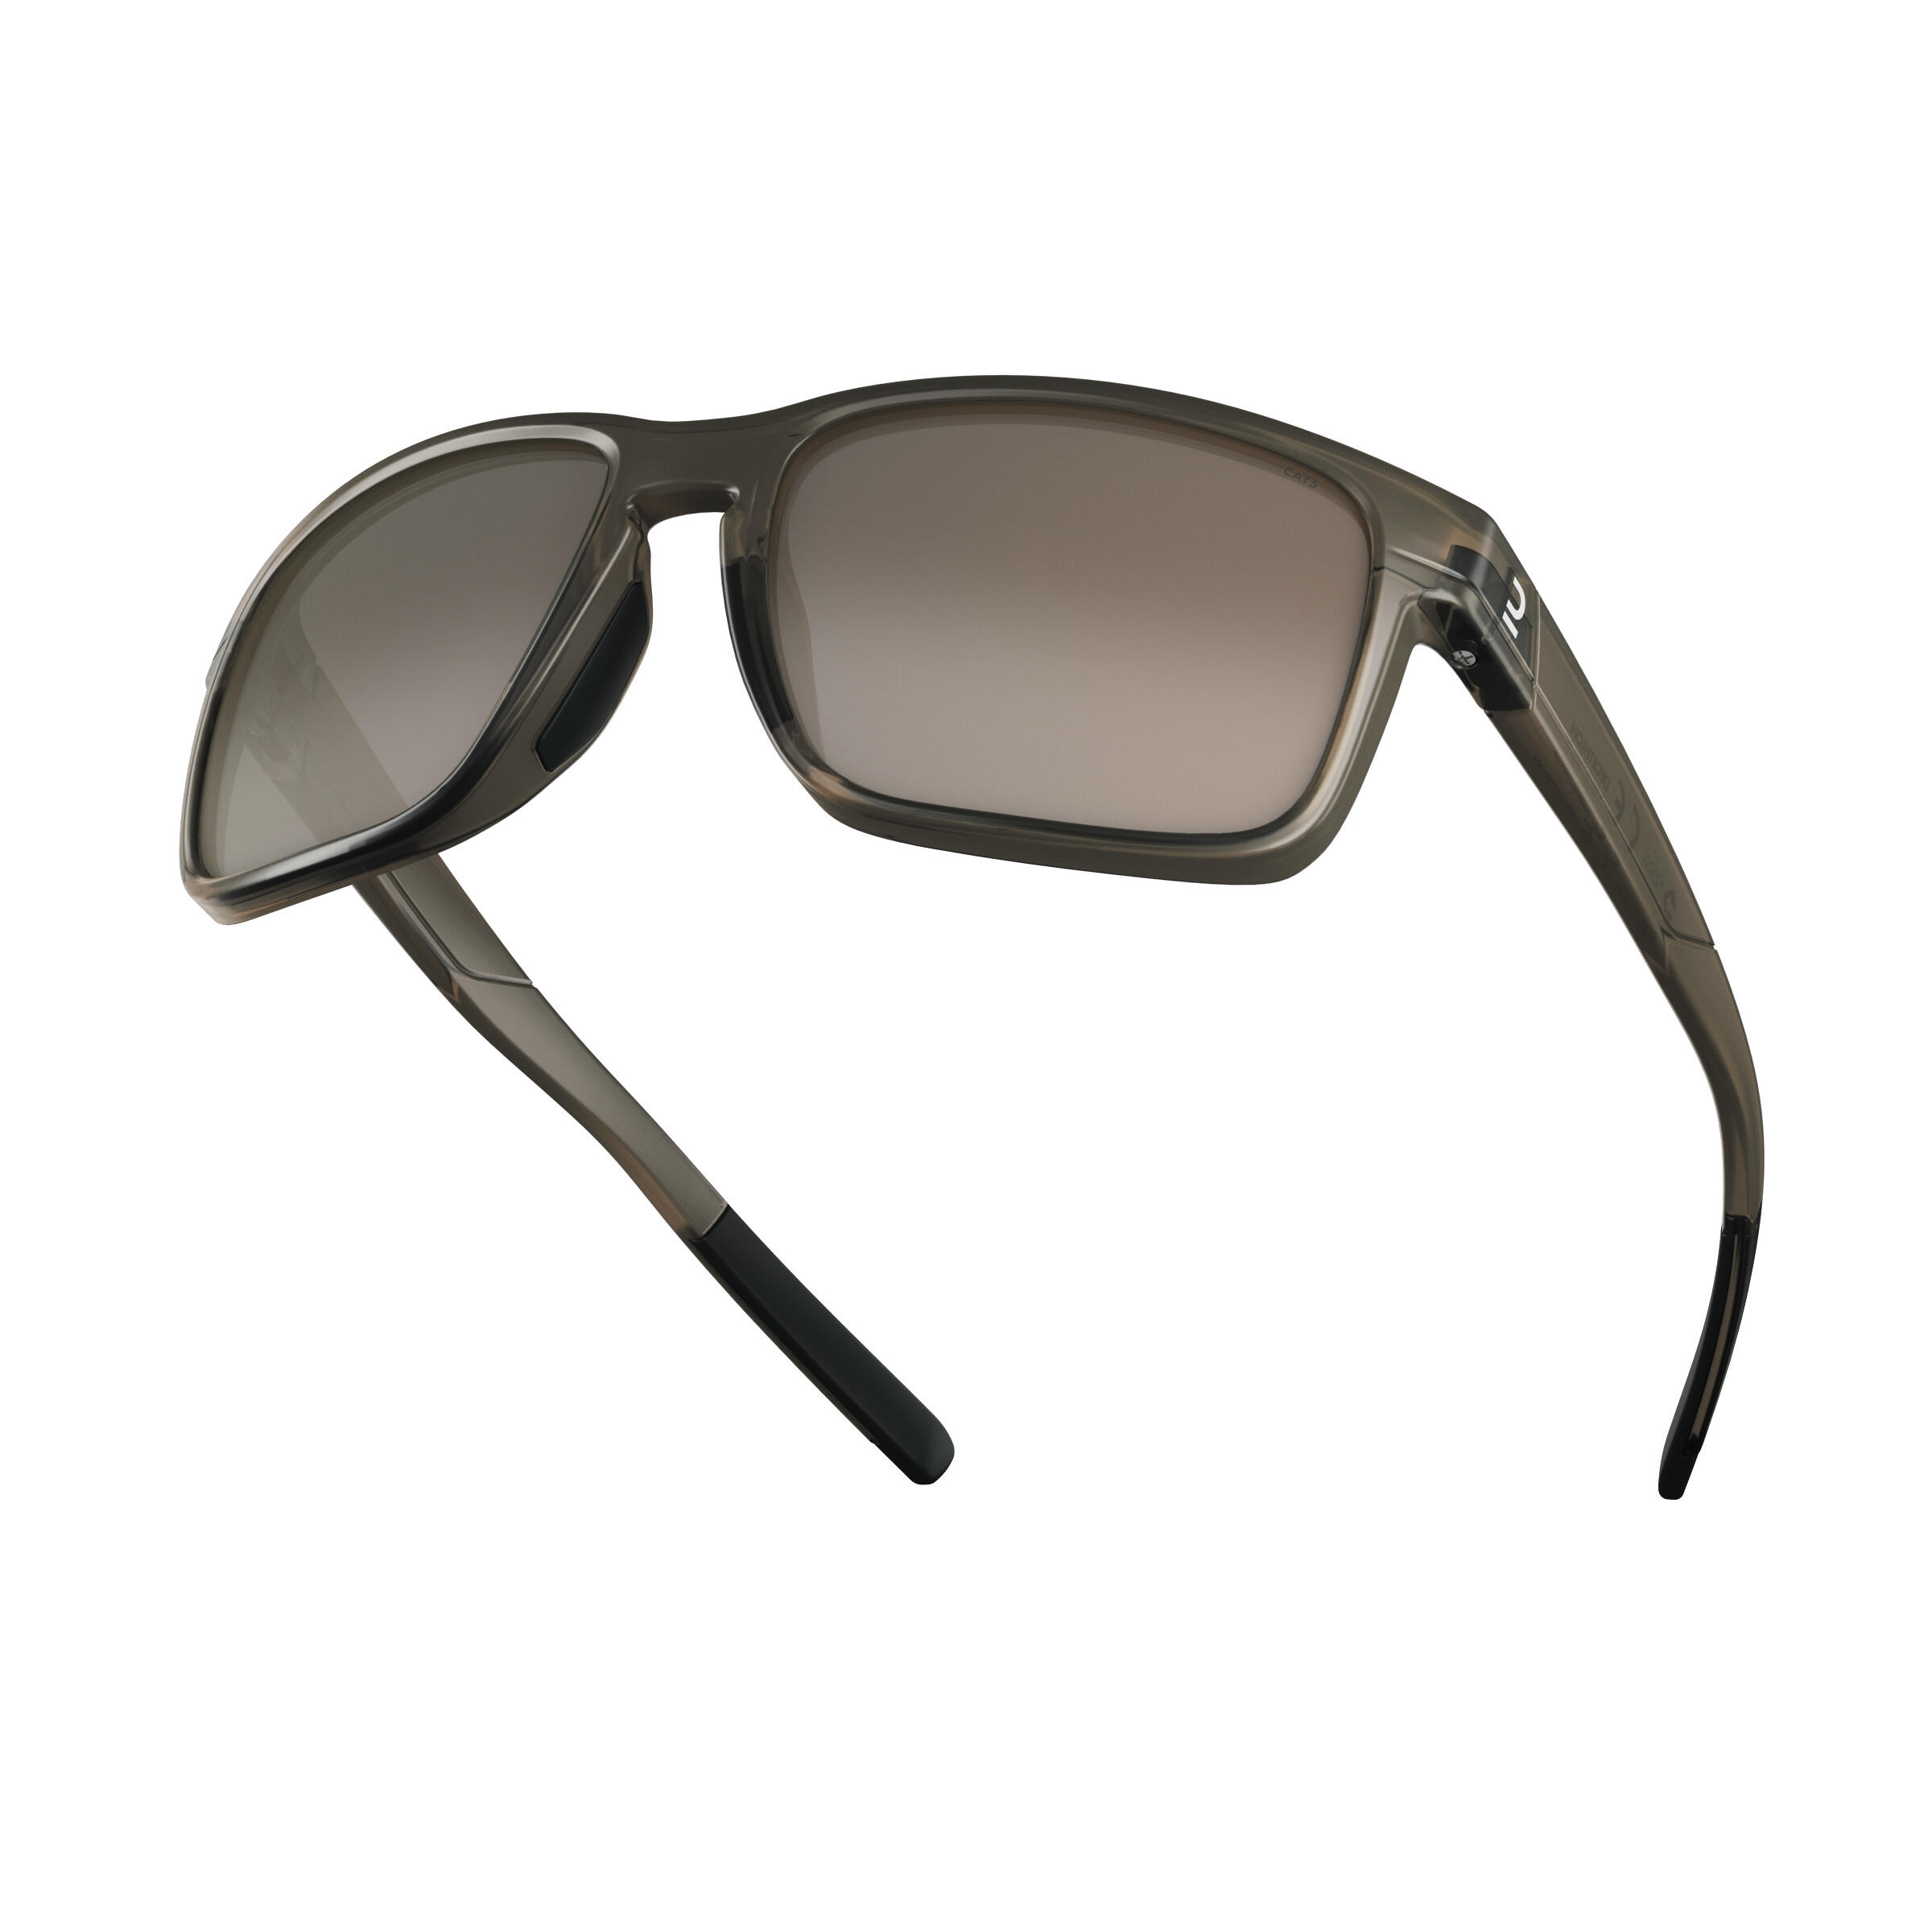 Adult hiking sunglasses – MH530 – Category 3 5/9